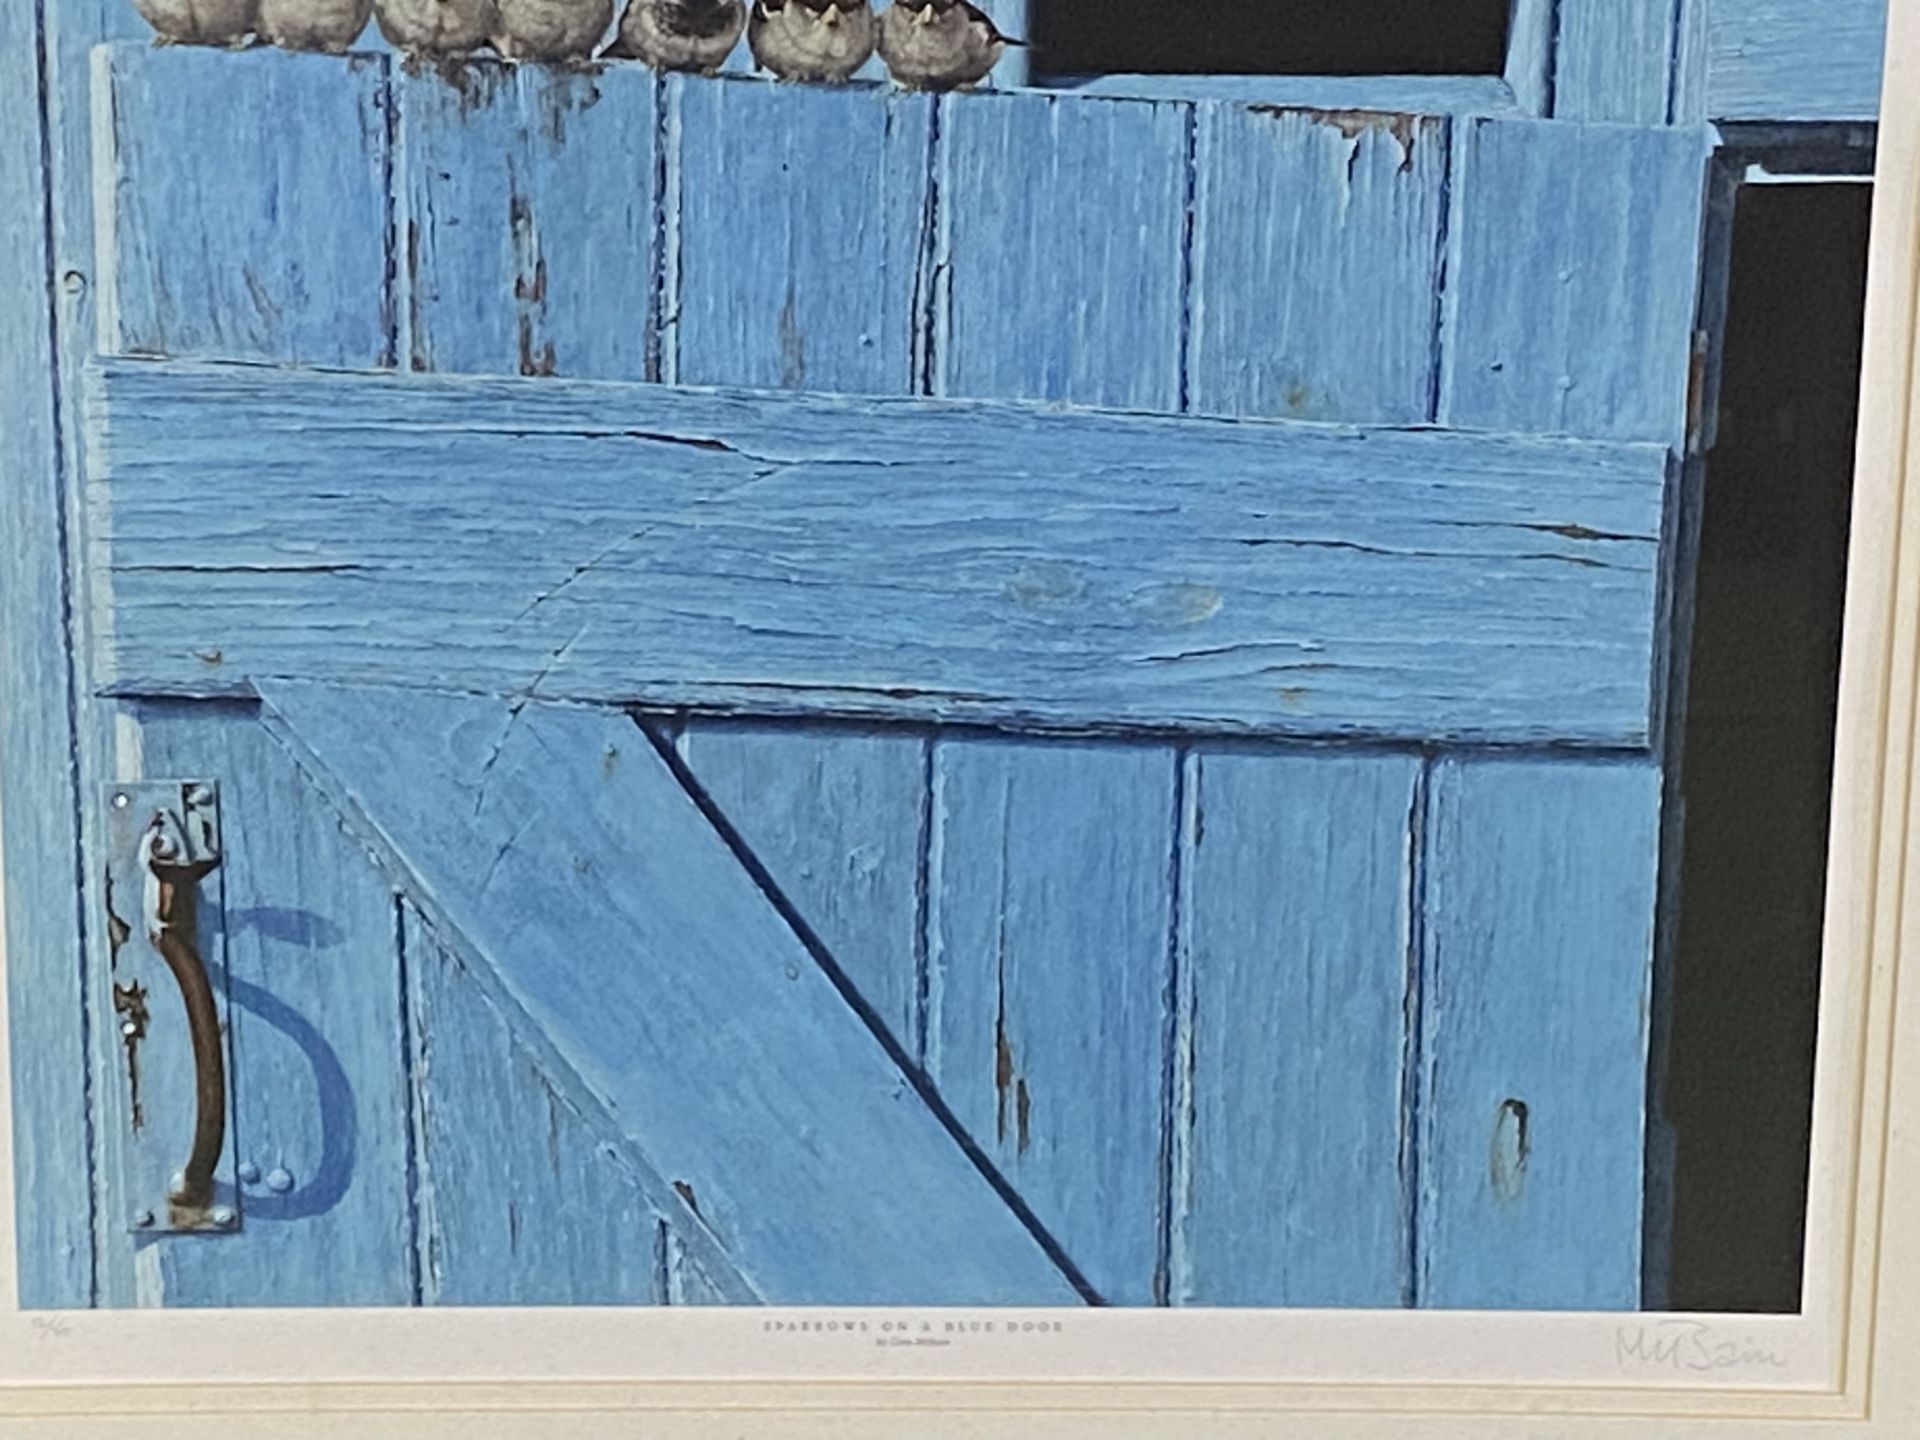 Framed and glazed limited edition lithographic print, Sparrows on a blue door - Image 2 of 3